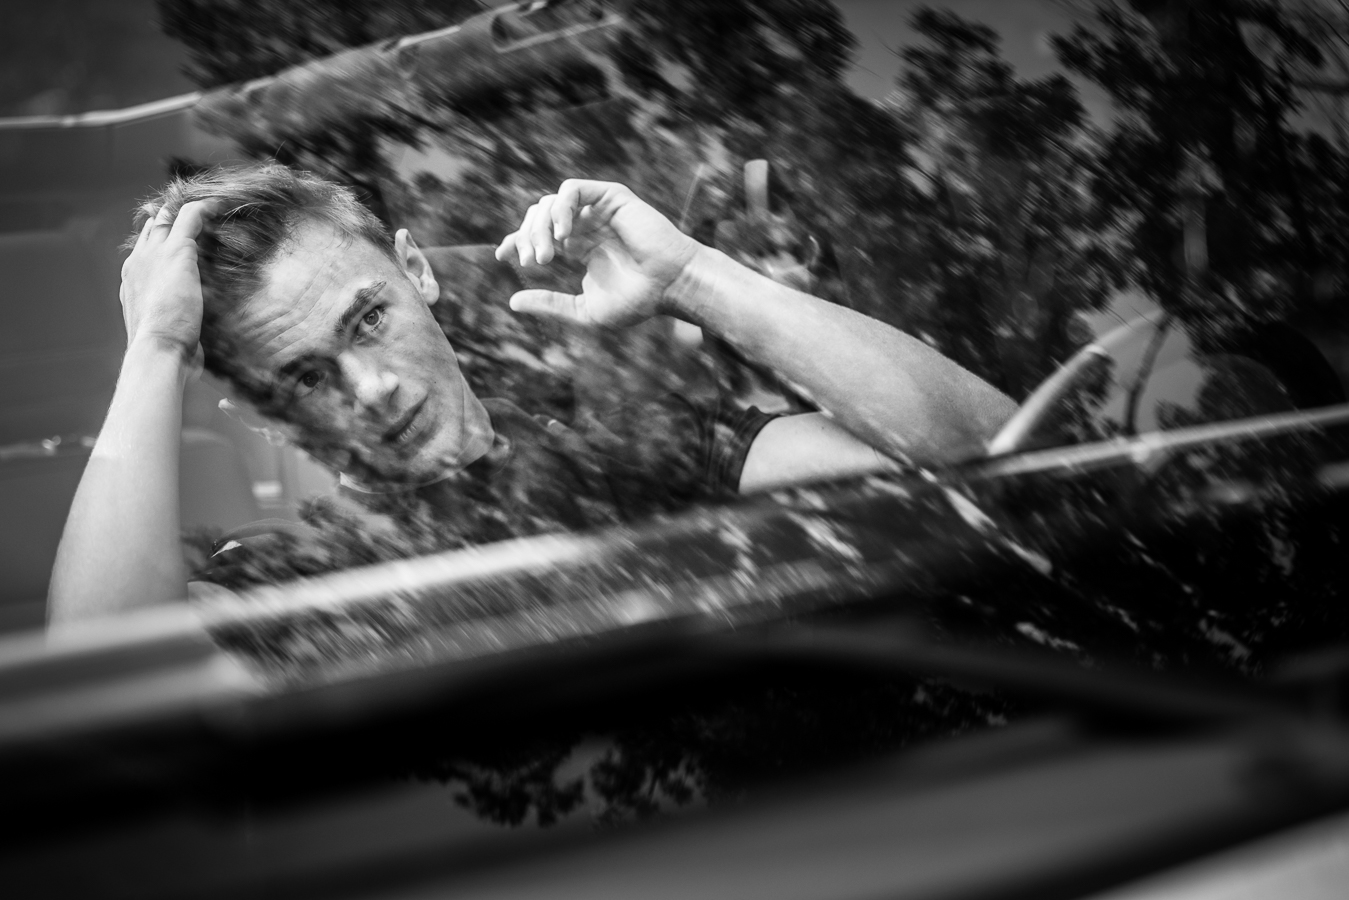 Creative Senior Portrait Photographer, lisa rhinehart, captures this black and white unique creative reflection image of this senior fixing his hair in the window of his car during this senior session in Chambersburg pa 